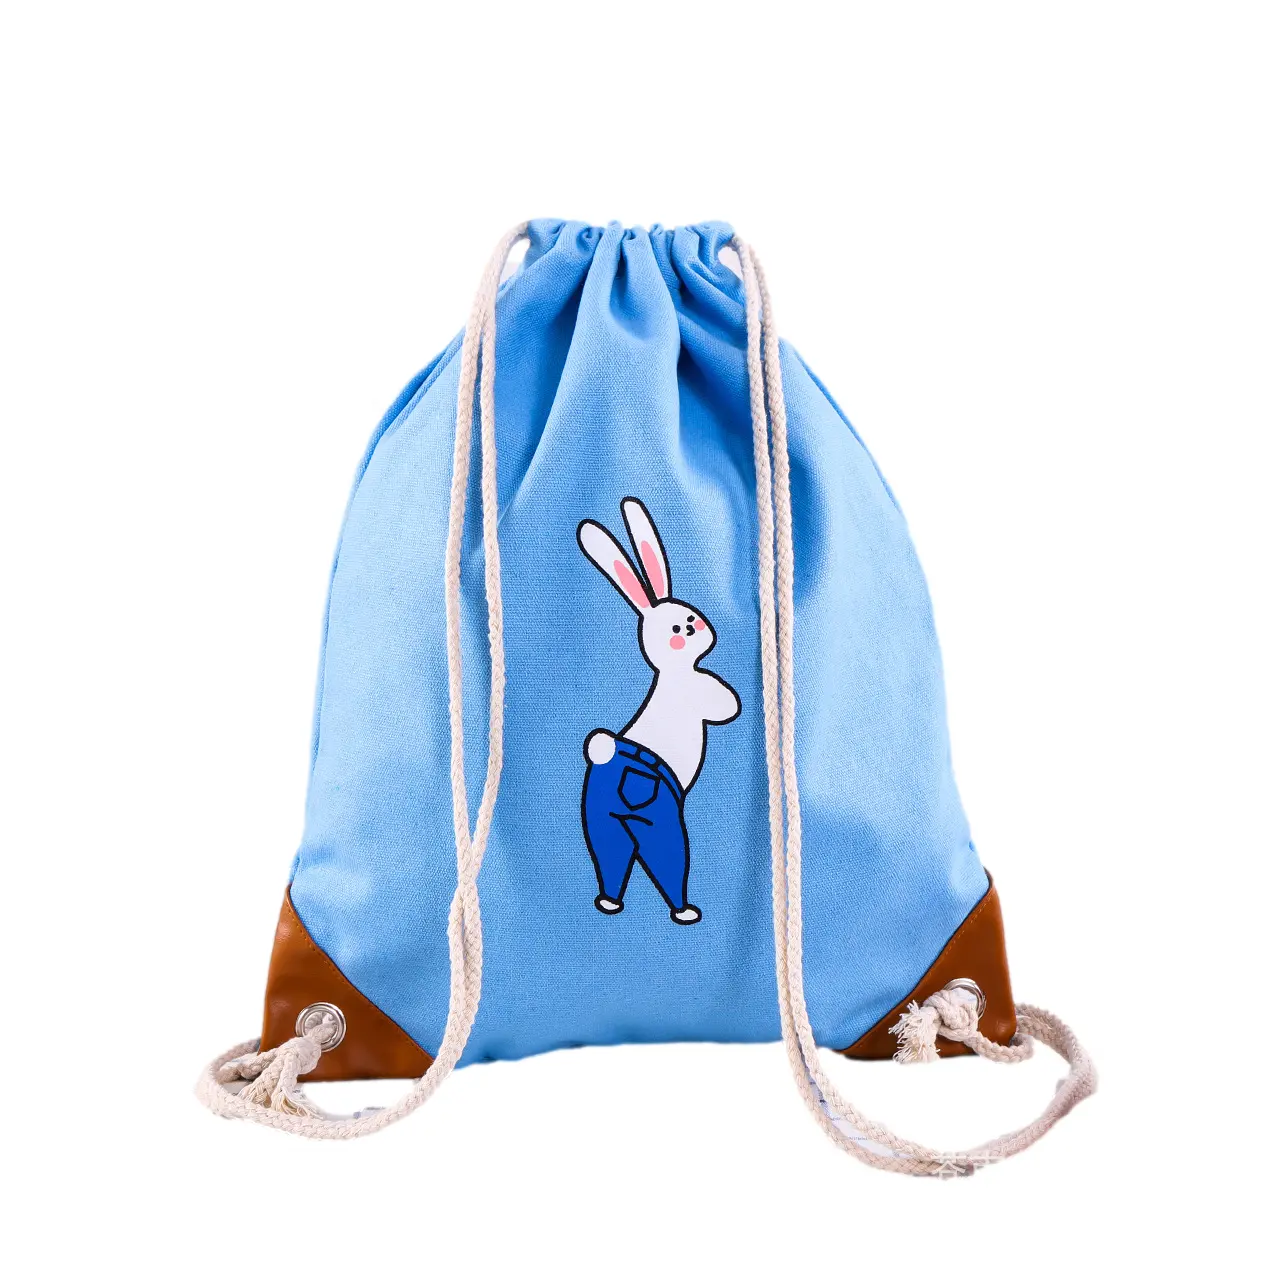 Wholesale Best White Dust Bags Cotton Canvas Drawstring Bag Backpack With Logo